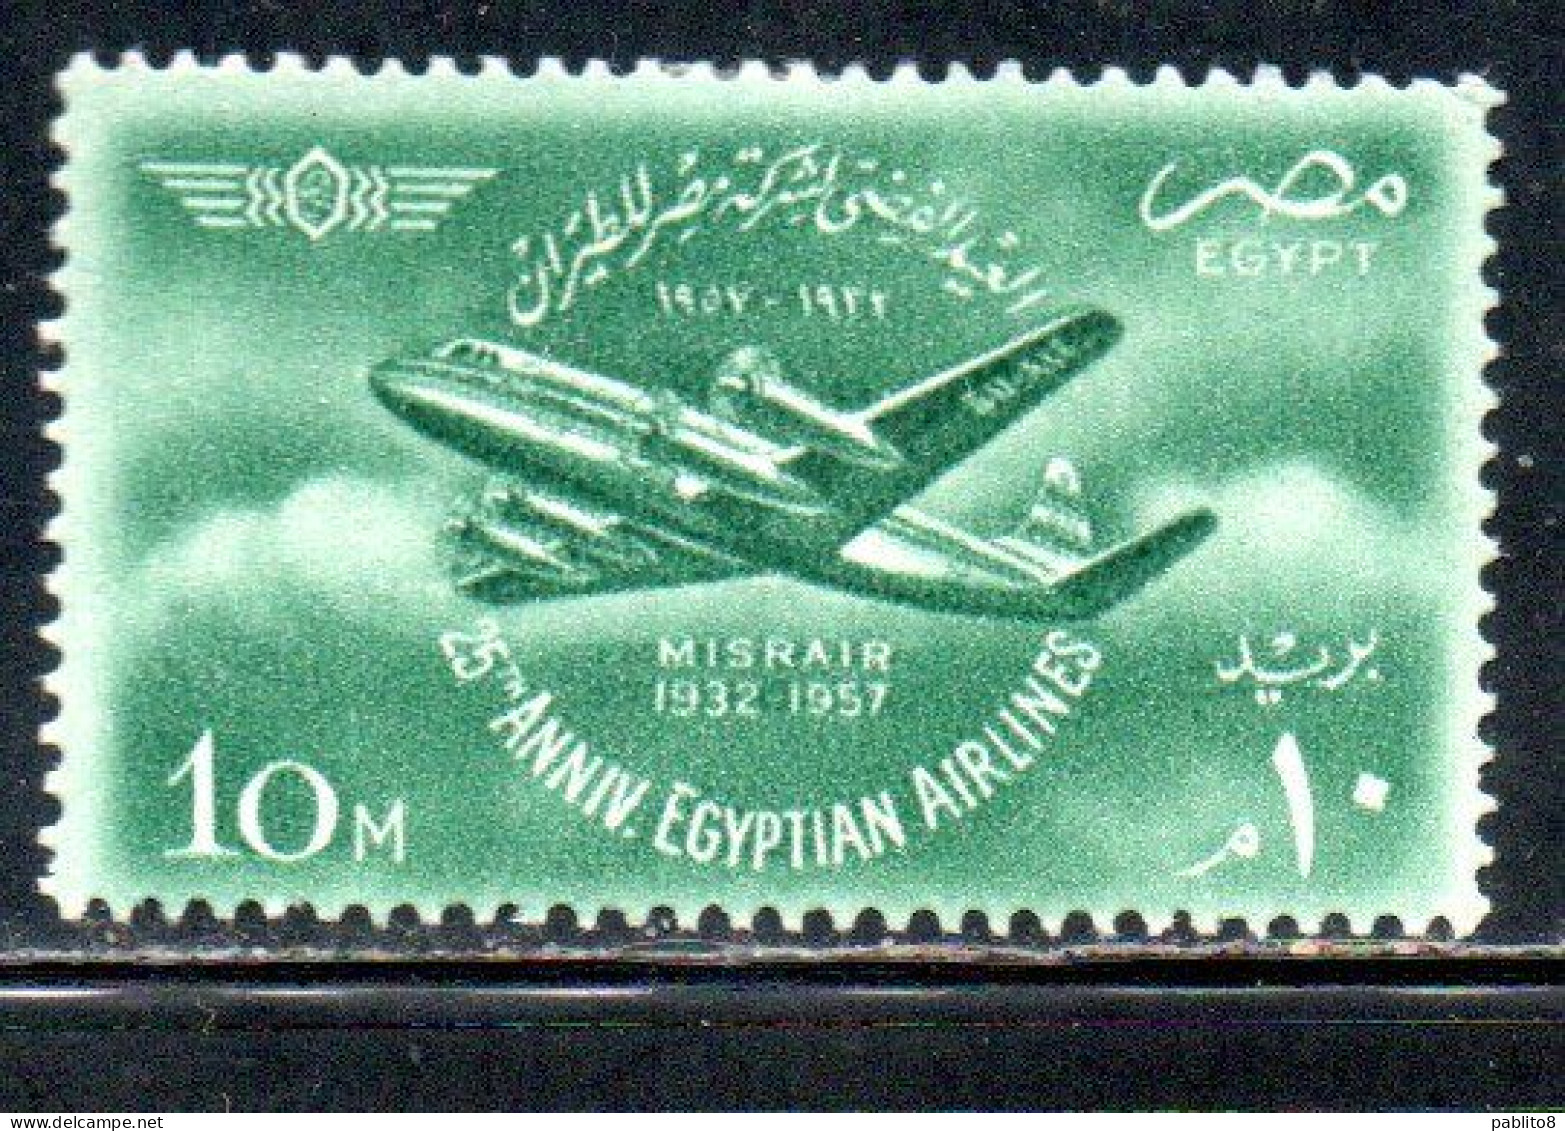 UAR EGYPT EGITTO 1957 EGYPTIAN AIR FORCE AND OF MISRAIR AIRLINE VISCOUNT PLANE 10m MH - Nuovi